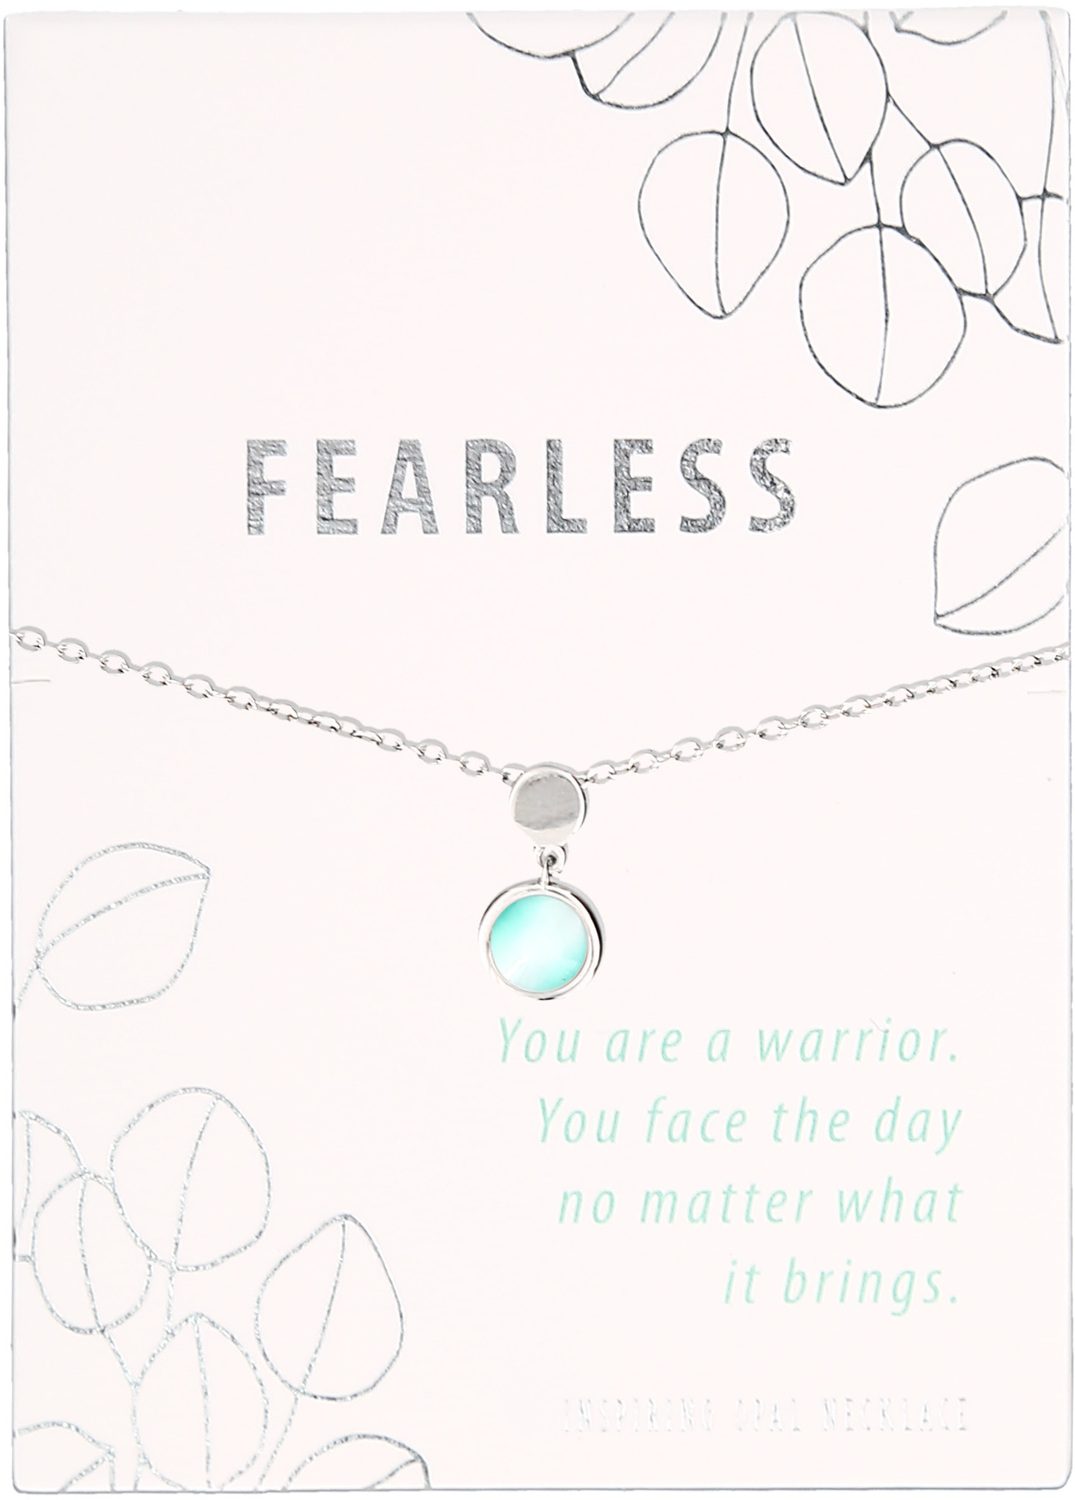 Fearless
Forget-Me-Not Opal by Faith Hope and Healing - Fearless
Forget-Me-Not Opal - 16.5"-18.5" Rhodium Plated Inspirational Necklace